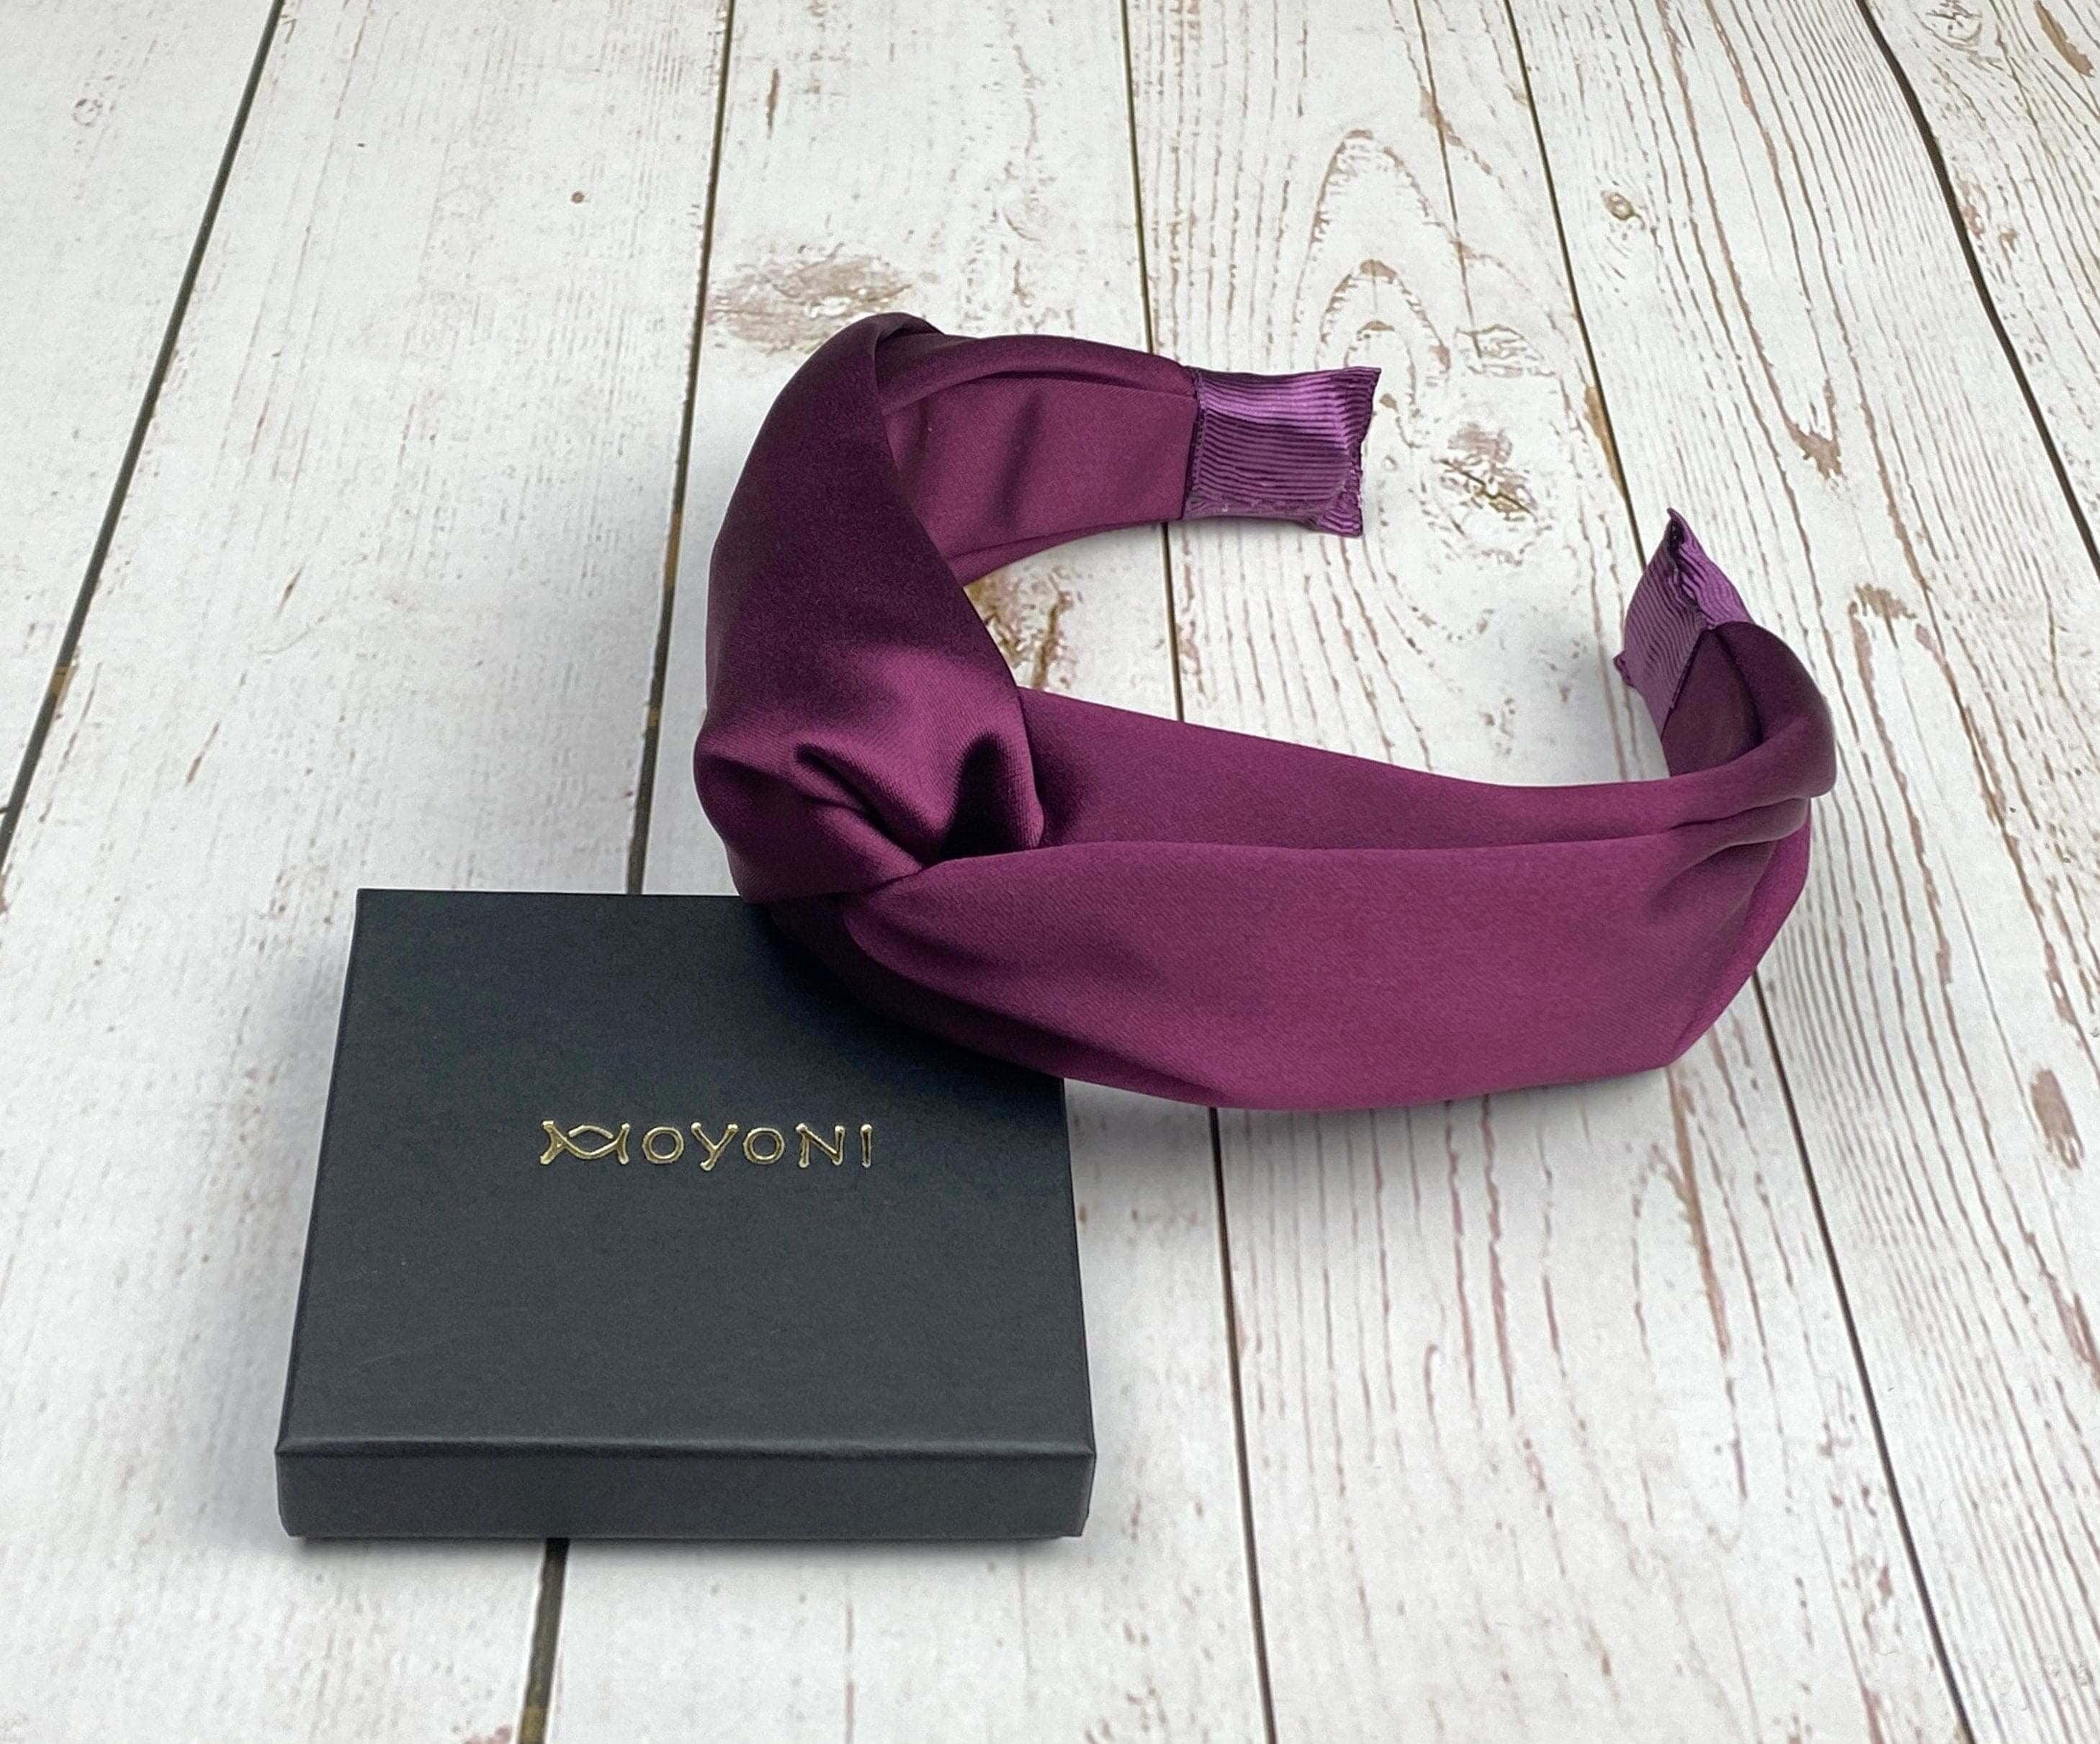 Trendy Maroon Satin Knotted Headband for Women - Classic Fashion Hairband in Dark Cherry Color without Padding available at Moyoni Design